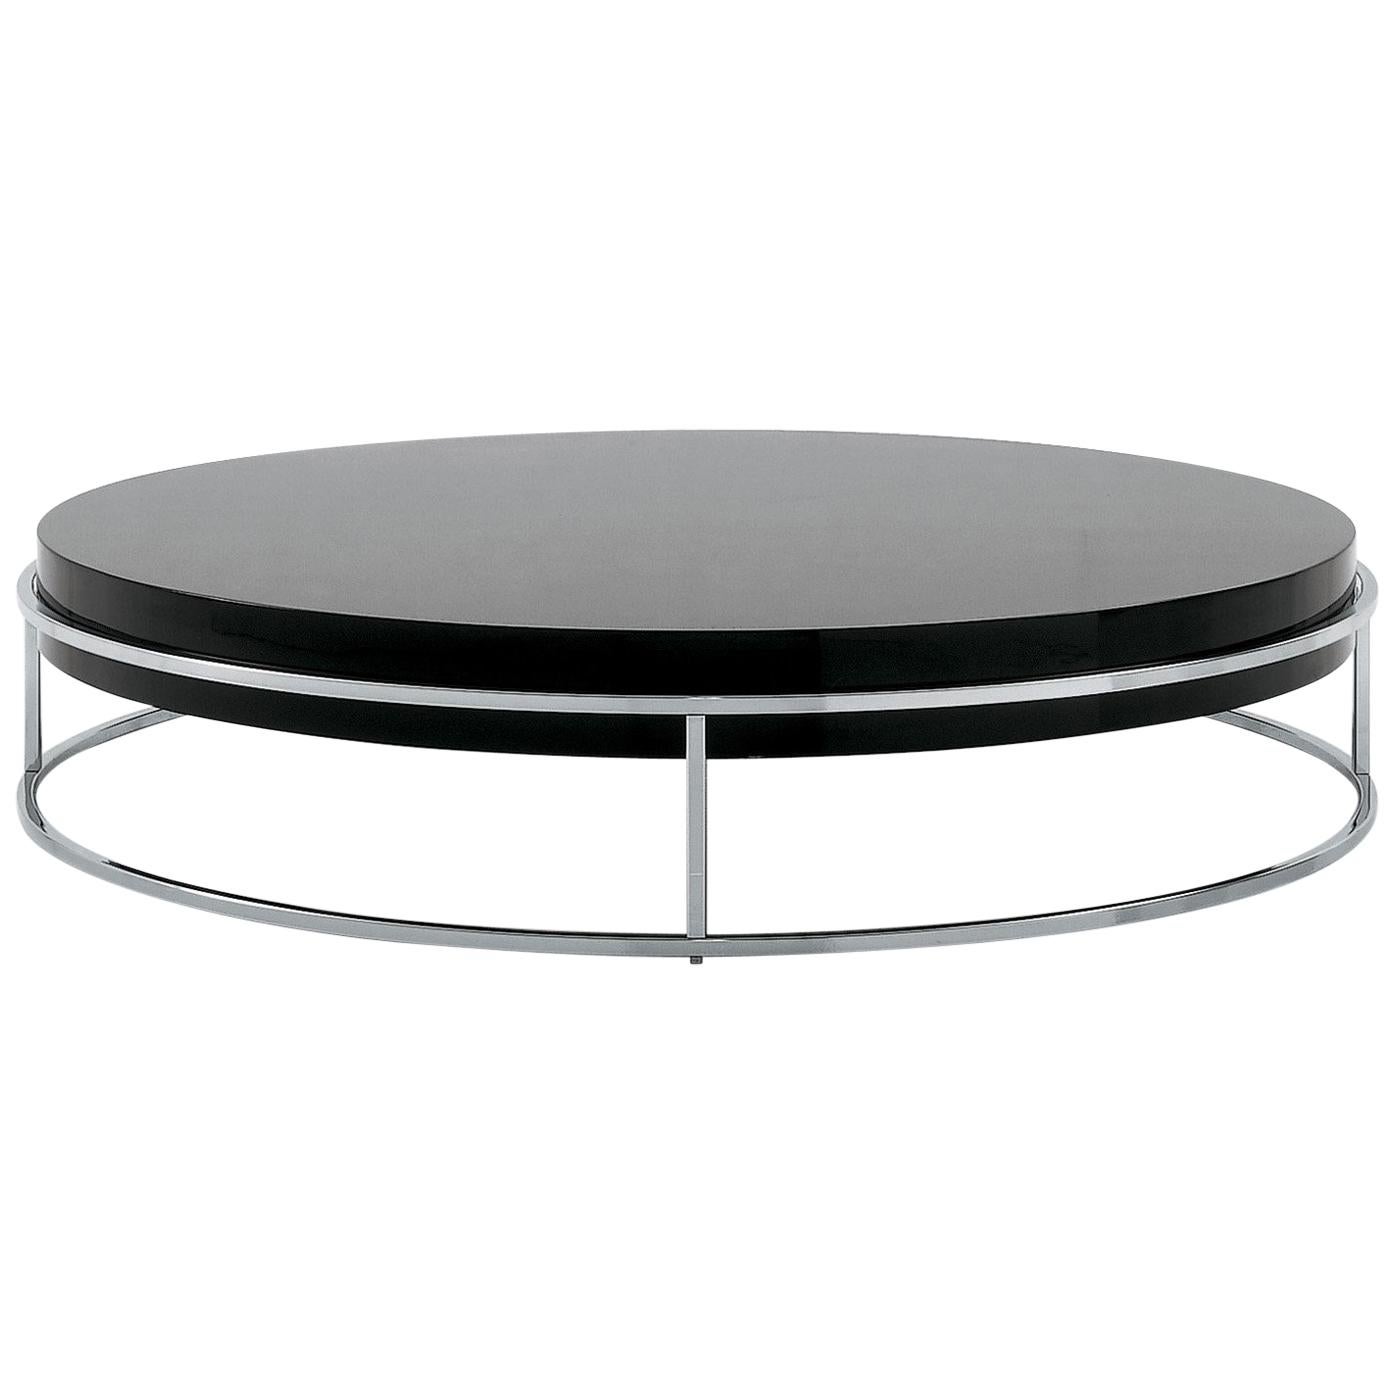 Nube Italia Link A Coffee Table in Lacquered Black by Ricardo Bello Dias For Sale